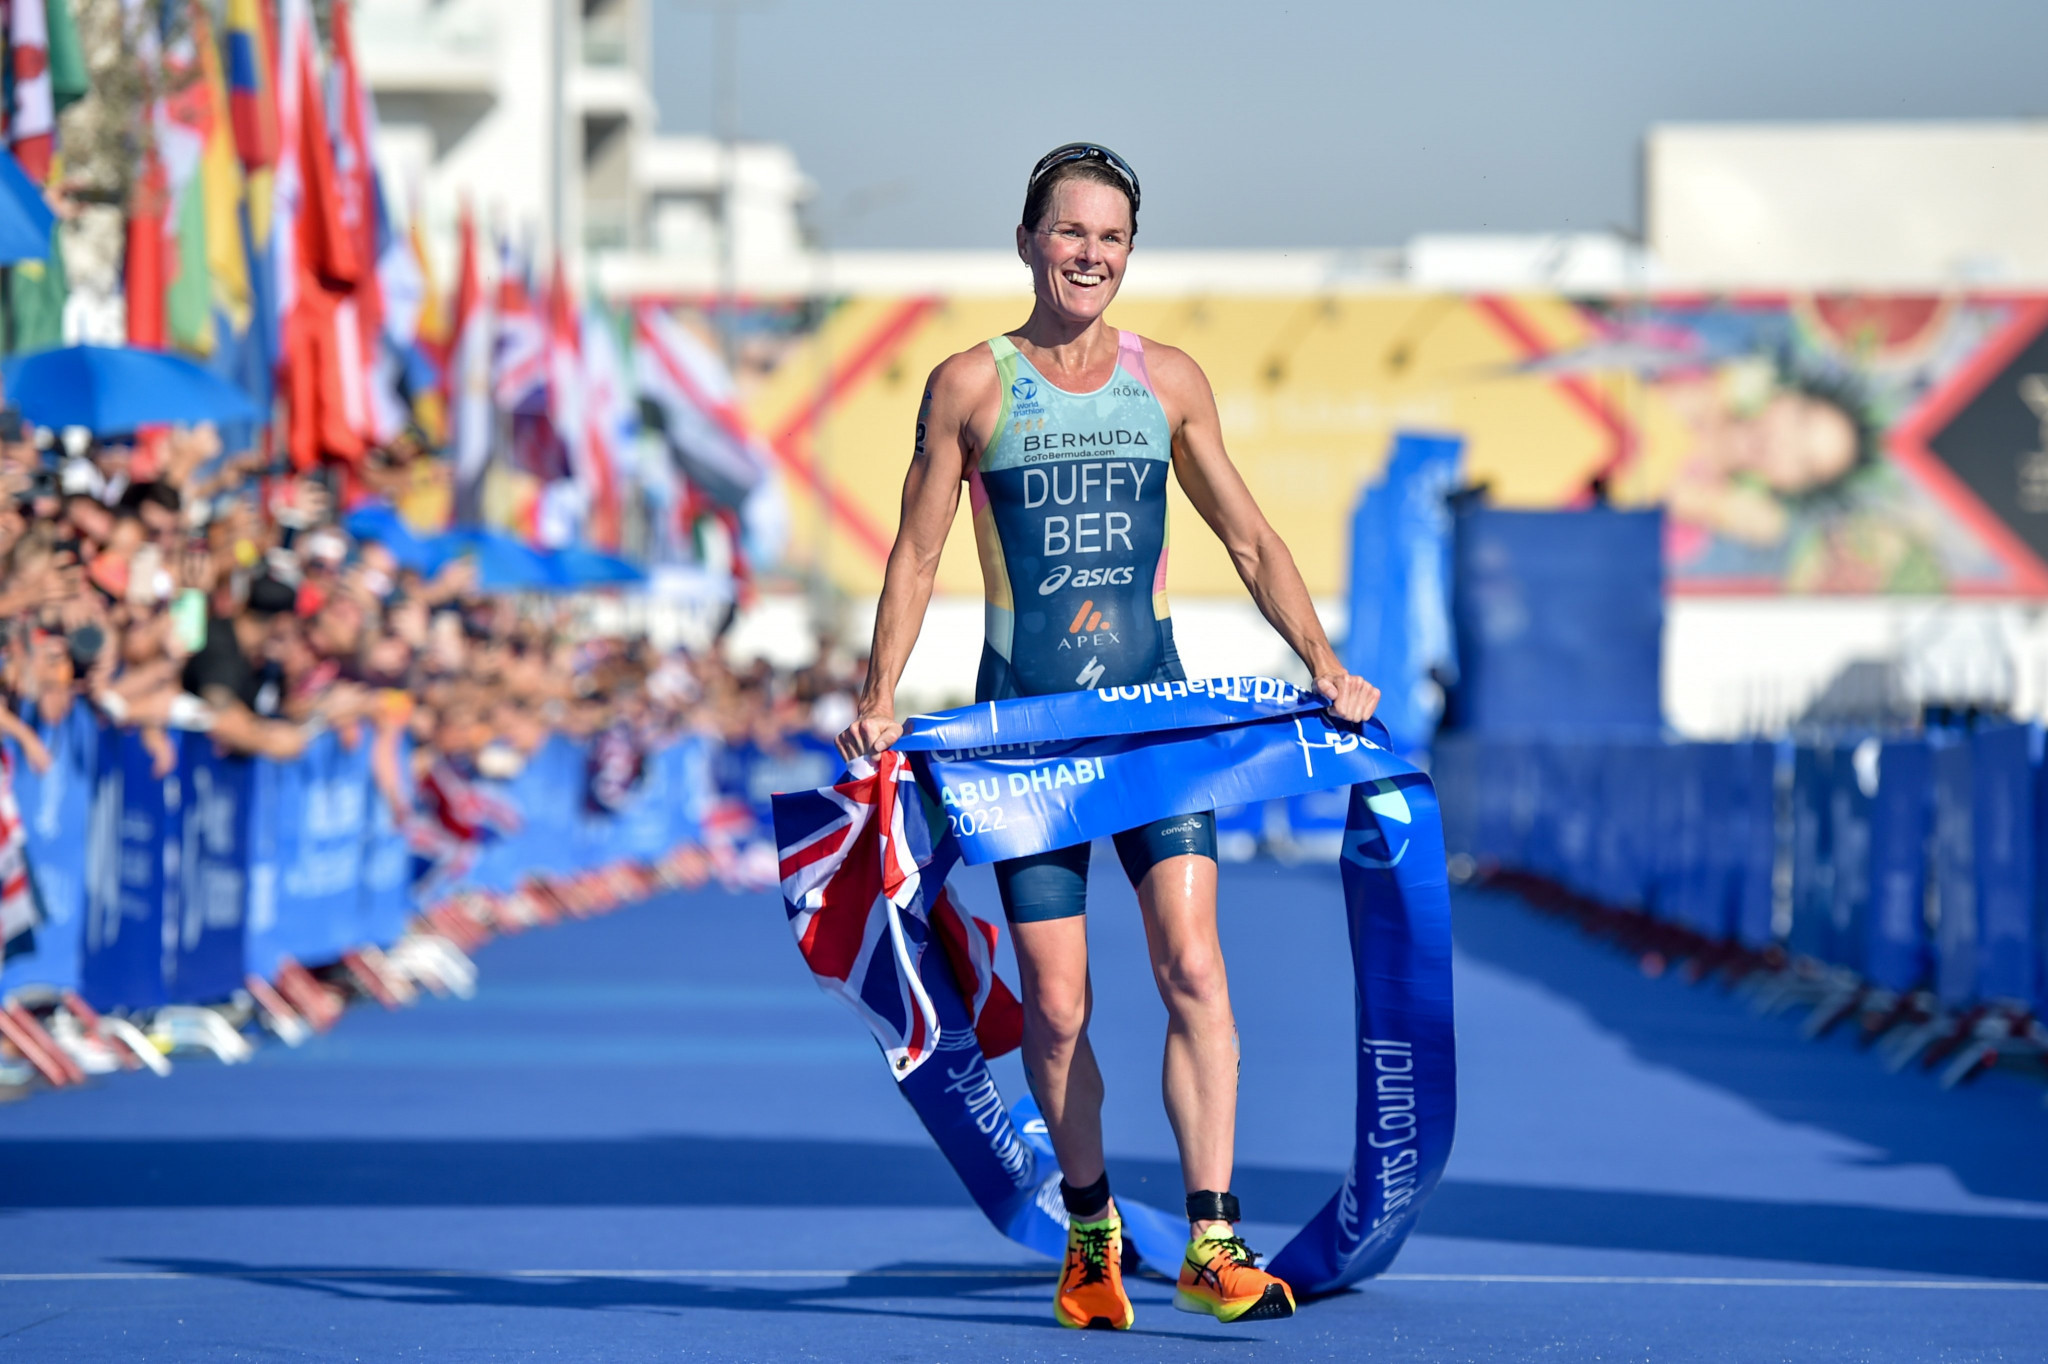 Bermuda's Flora Duffy triumphed in Abu Dhabi to be crowned world champion for the fourth time ©World Triathlon